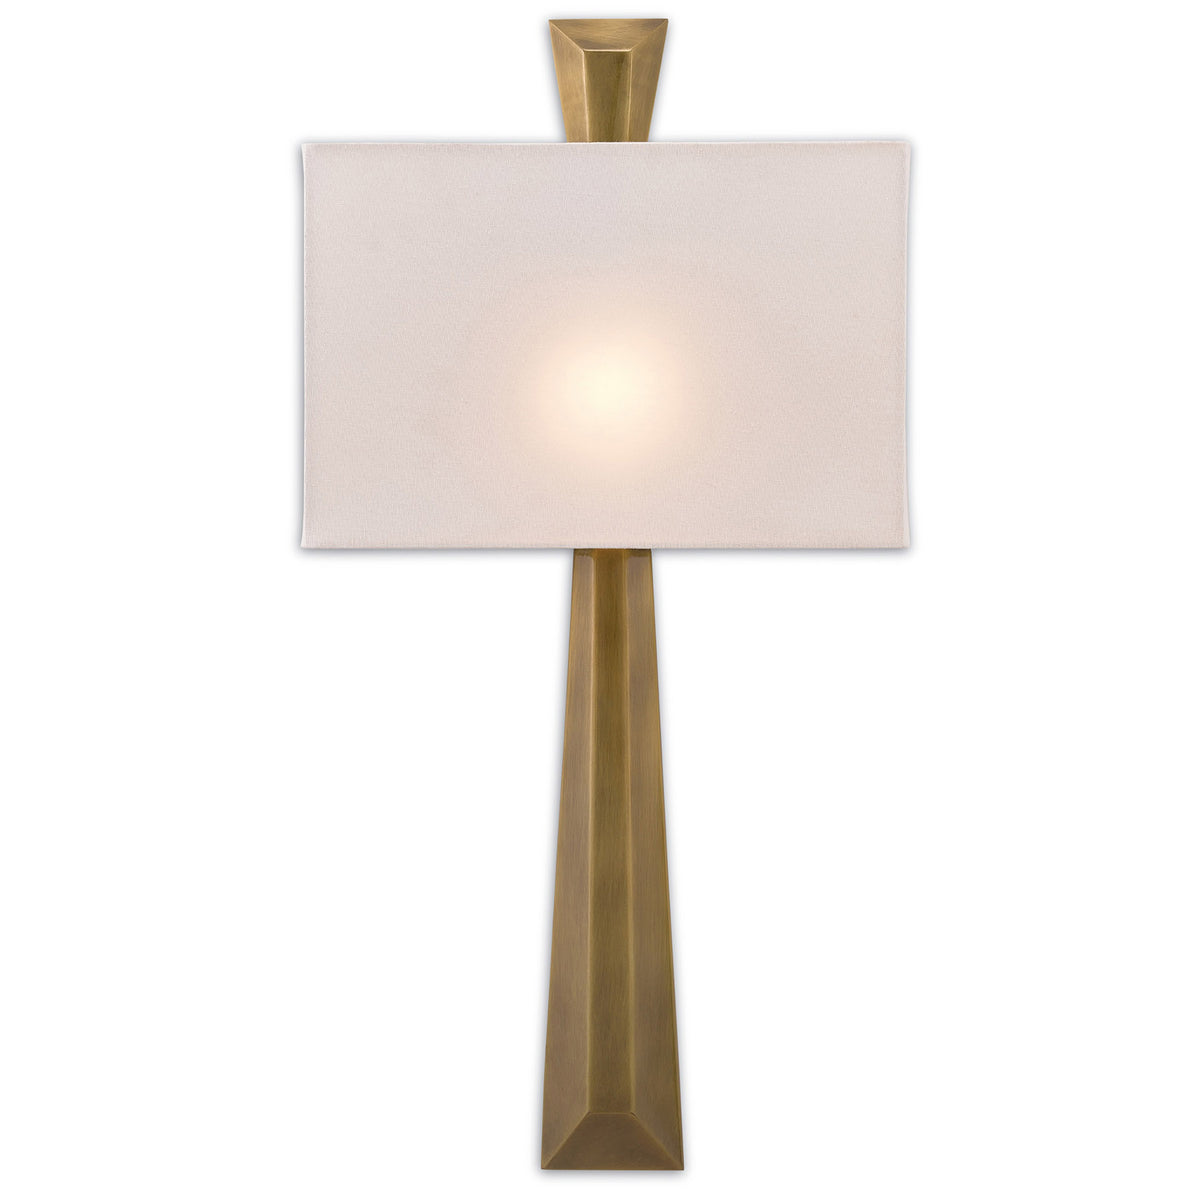 Arno Brass Wall Sconce